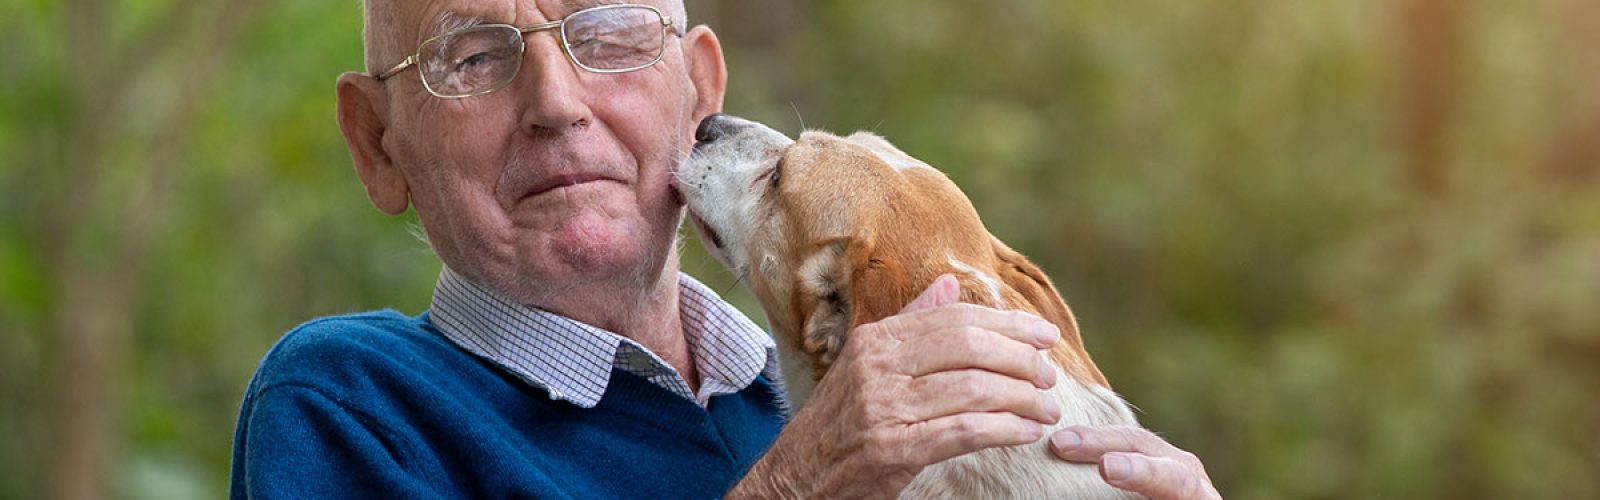 elderly-man-being-kissed-on-cheek-by-small-dog